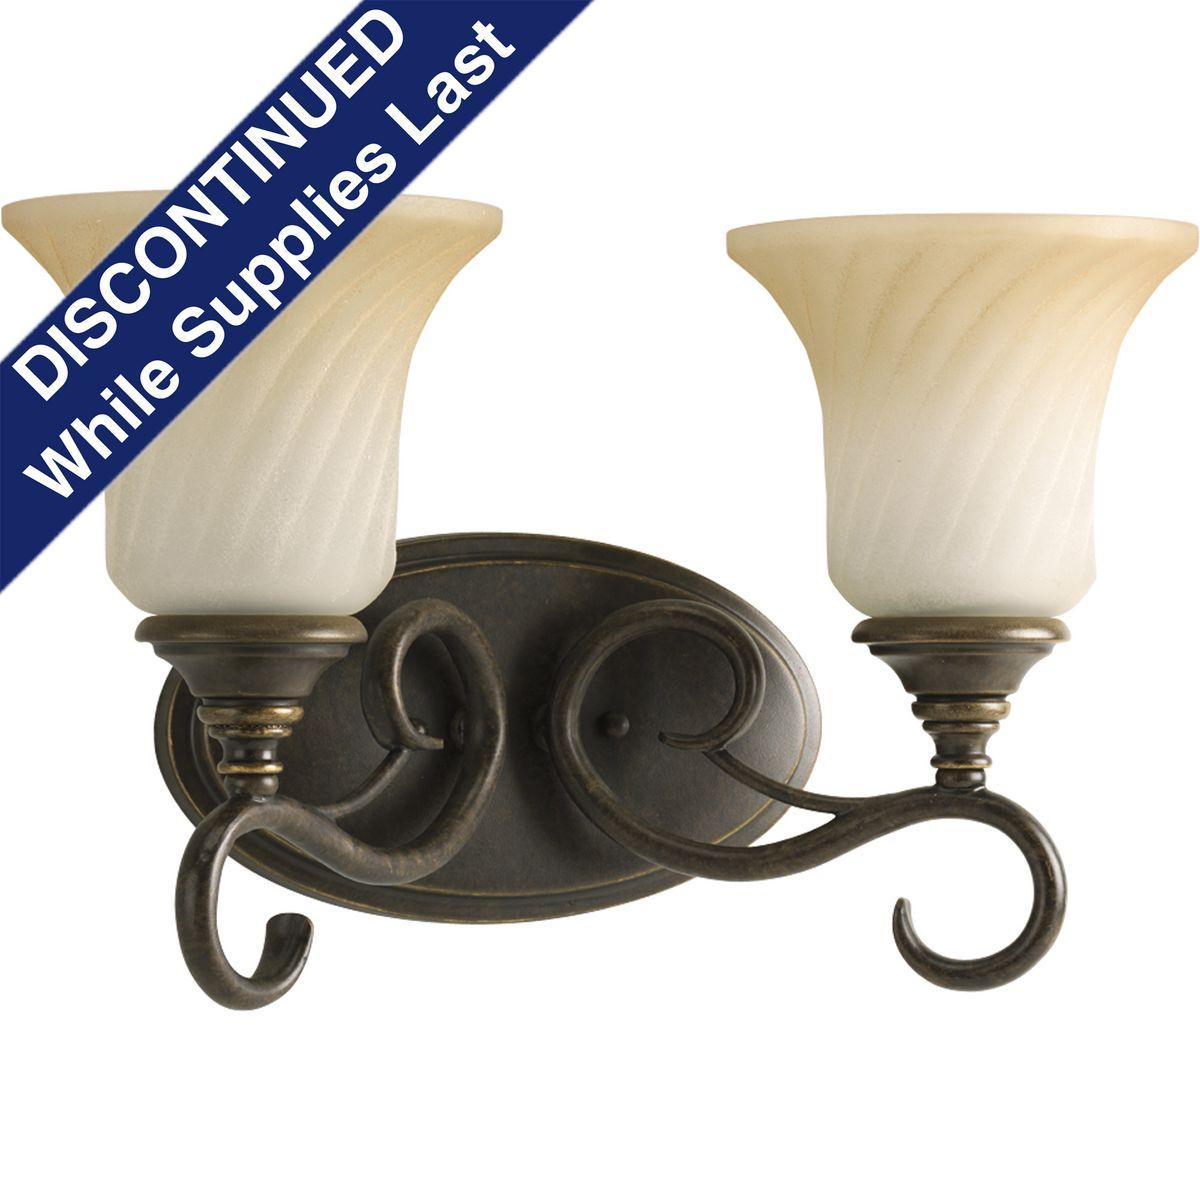 Hubbell P2784-77 The casual, comfortable feel of the Kensington Collection is perfect for many interiors. Two-light bath bracket features skillfully scrolled metalwork in a Forged Bronze finish. Trumpet-shaped, slightly textured glass shades are complemented by a frosted 